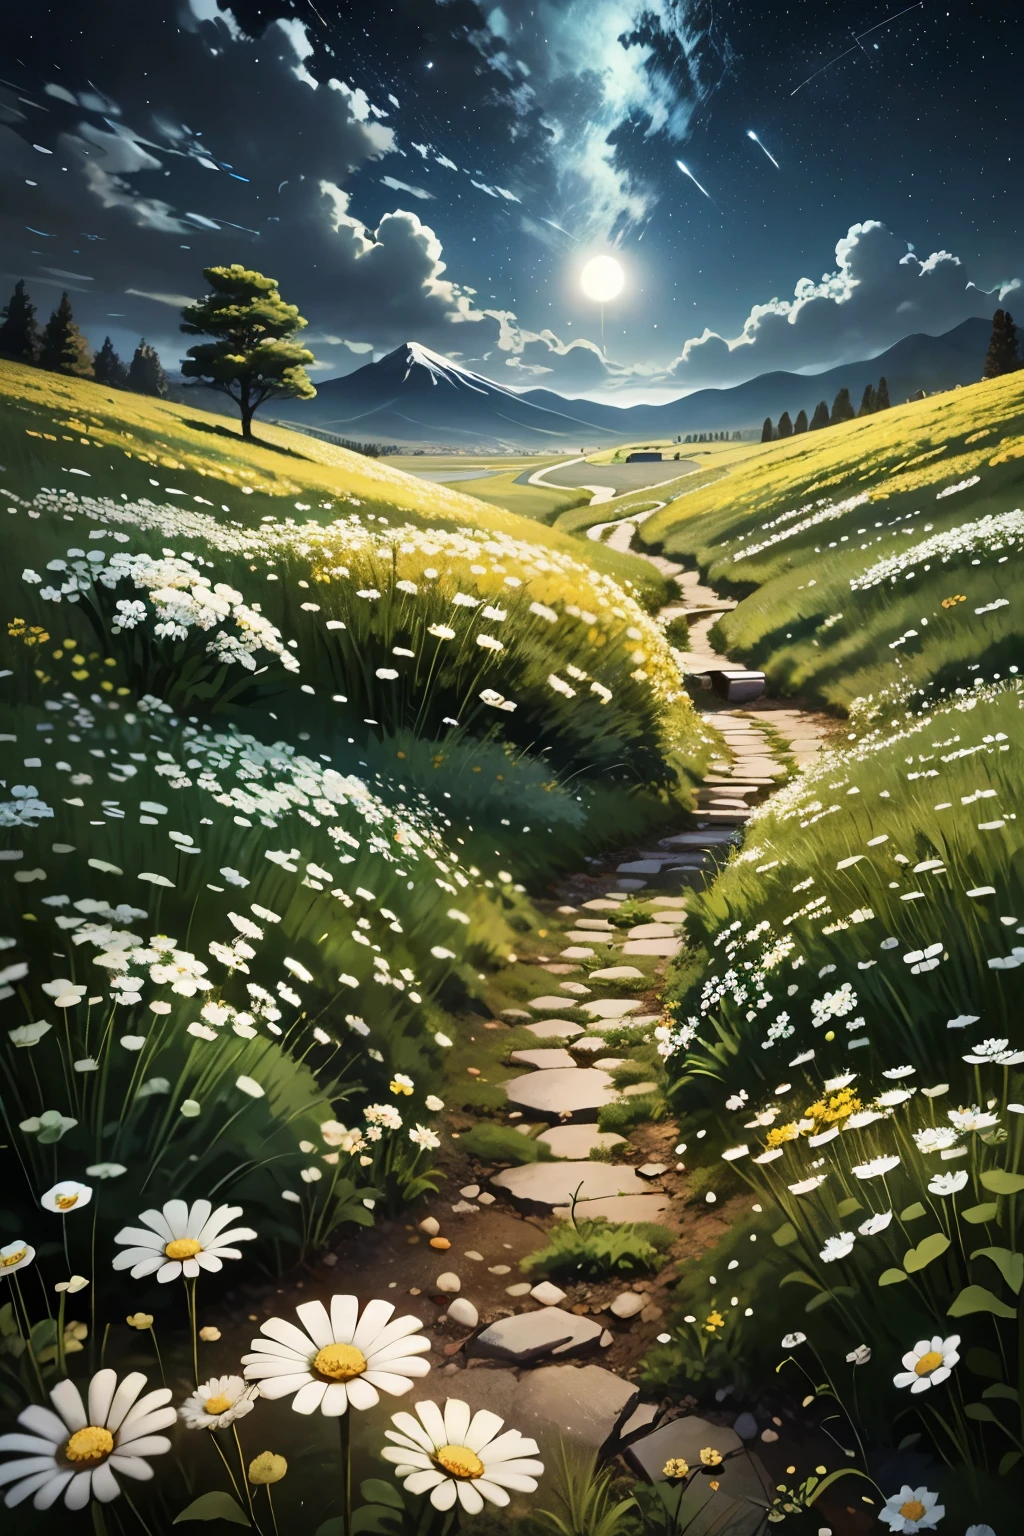 （masterpiece、need、Super exquisite、high resolution）， night:1.5，moonlight，meteor shower, Various flowers, landscape, venue, Sky, white flower, The mountains and fields are full of flowers, horizon, flower ,rain， yellow flower, daisy, landscape,, (illustration:1.0), masterpiece, best quality